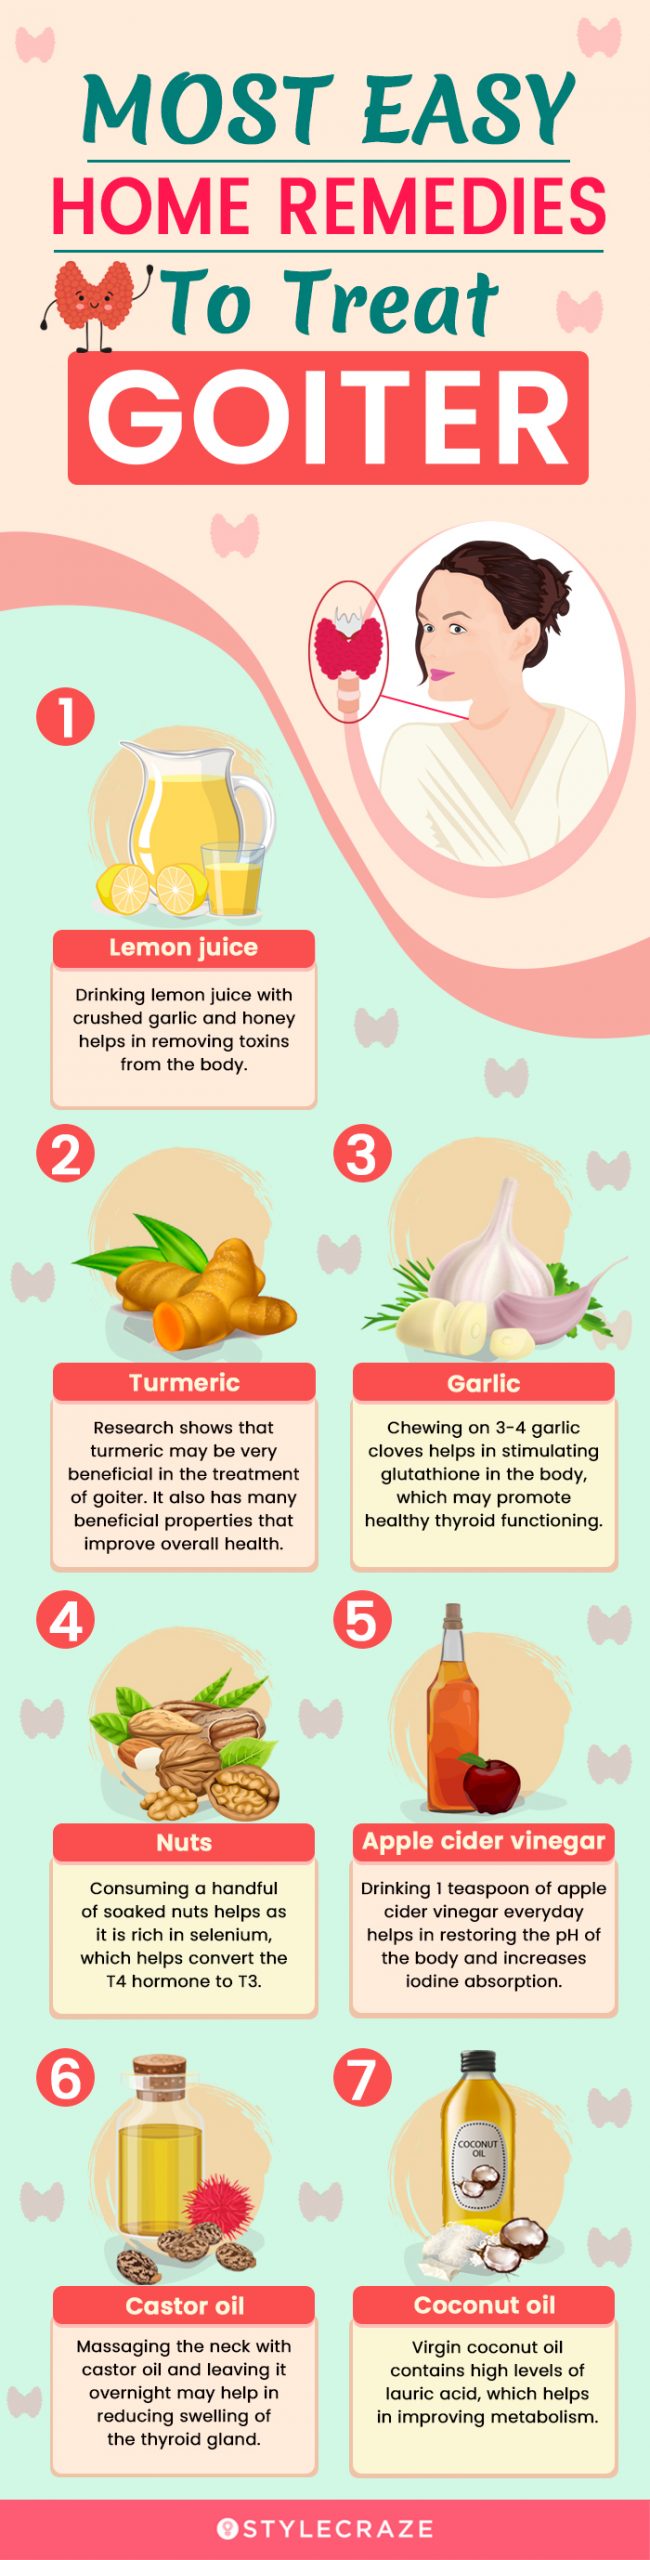 most easy home remedies to treat goiter [infographic]